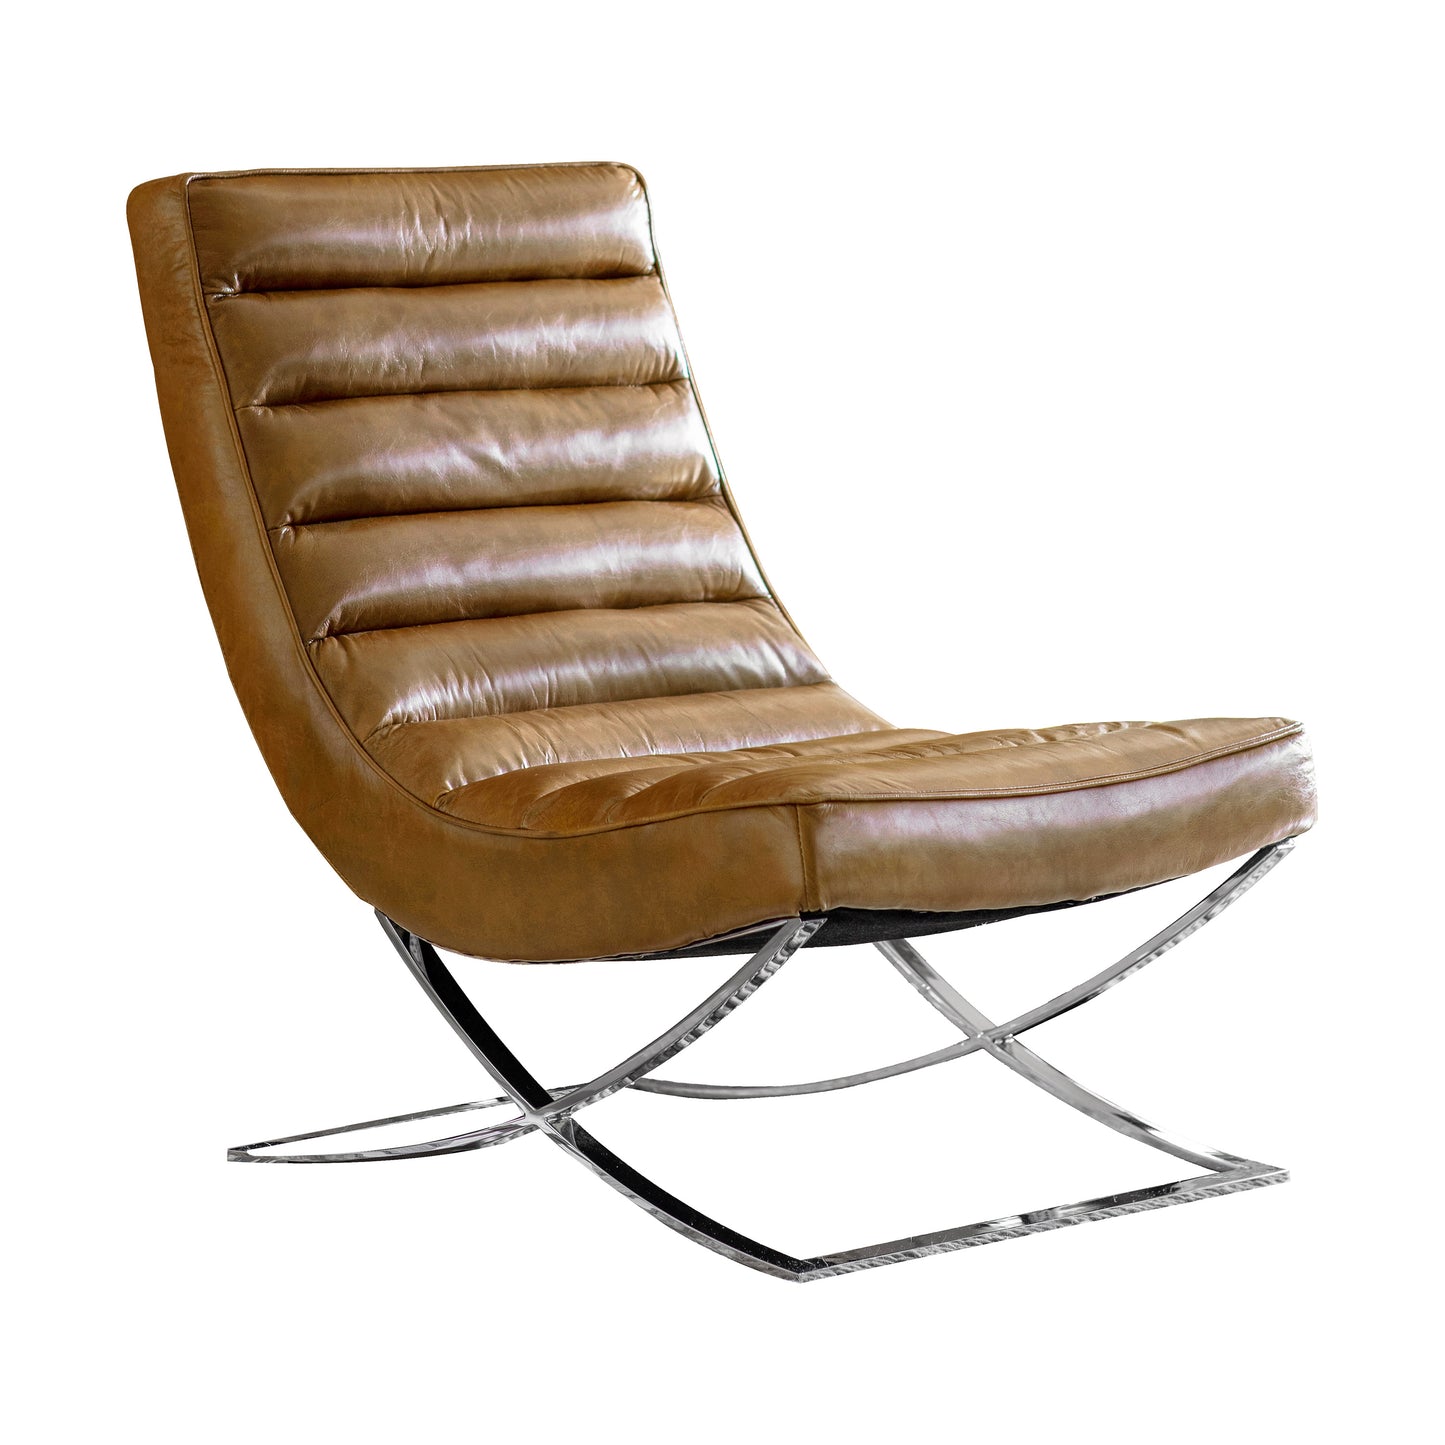 An Ermington Lounger, perfect for interior decor, in brown leather on a chrome frame.